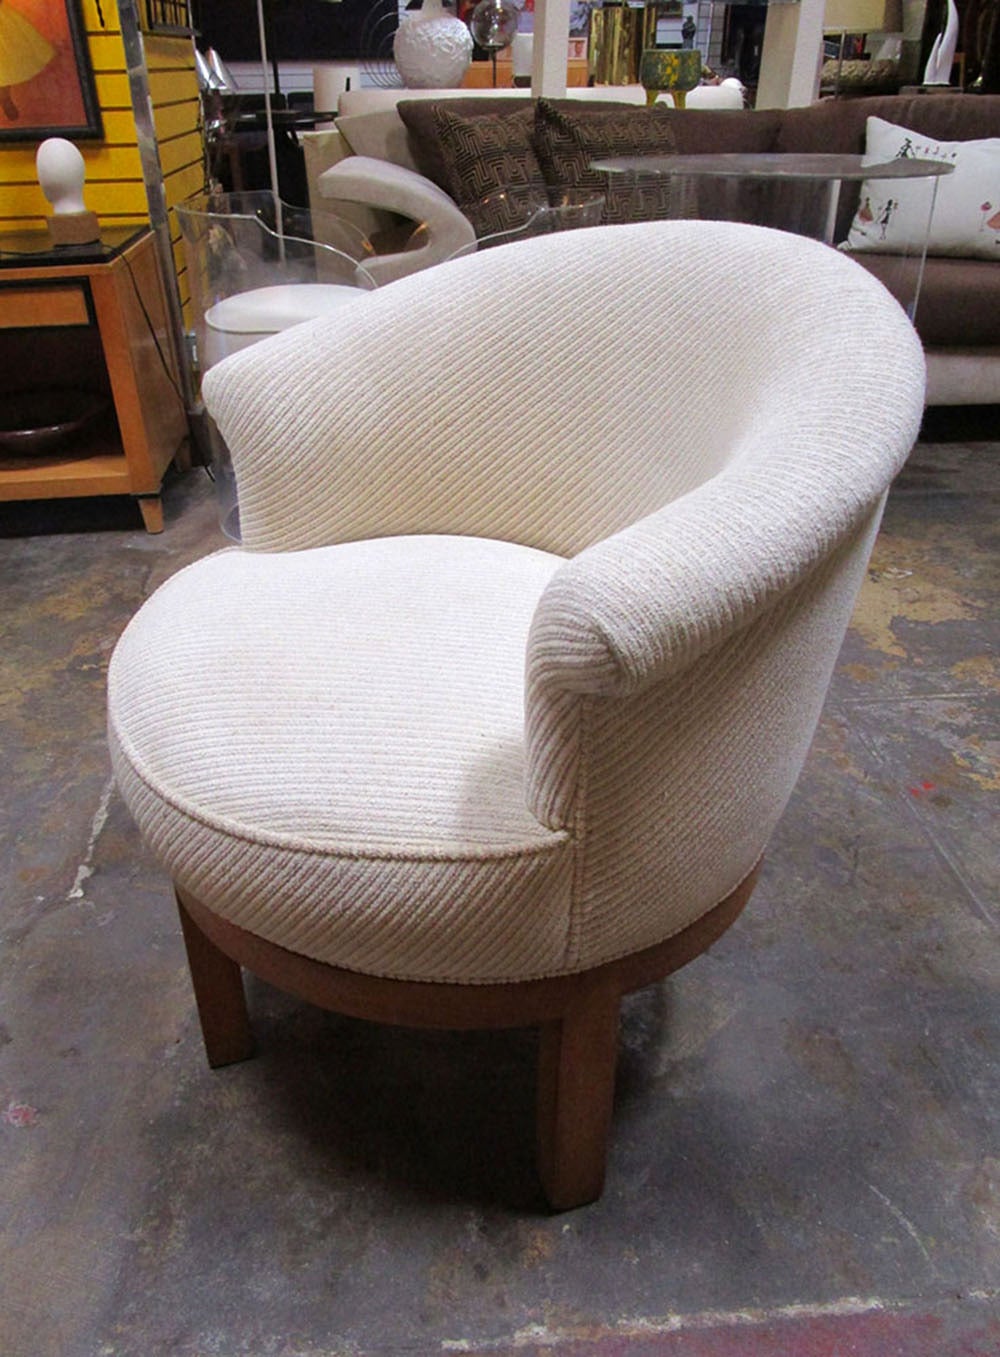 These 2 chairs are very comfortable and could be used as visitor chairs for an office as well as around a game table etc...
Their skirt and legs are made of solid blond mahogany. They retain their original corduroy off white fabric which is still